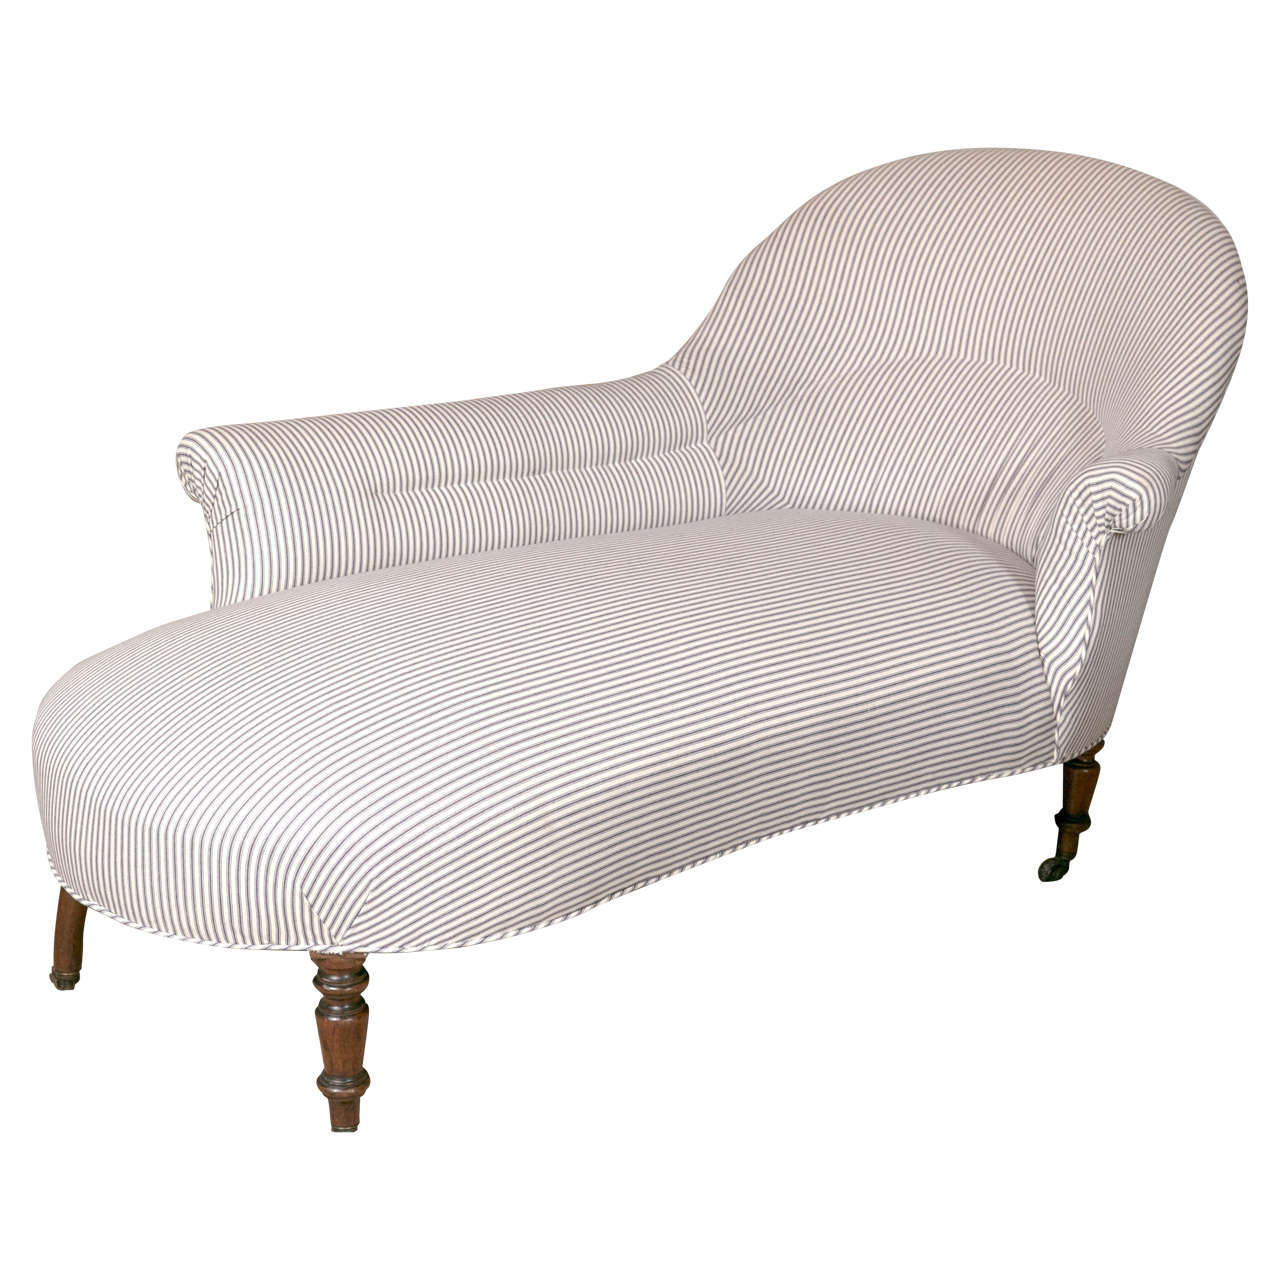 19th Century English Chaise Longue For Sale